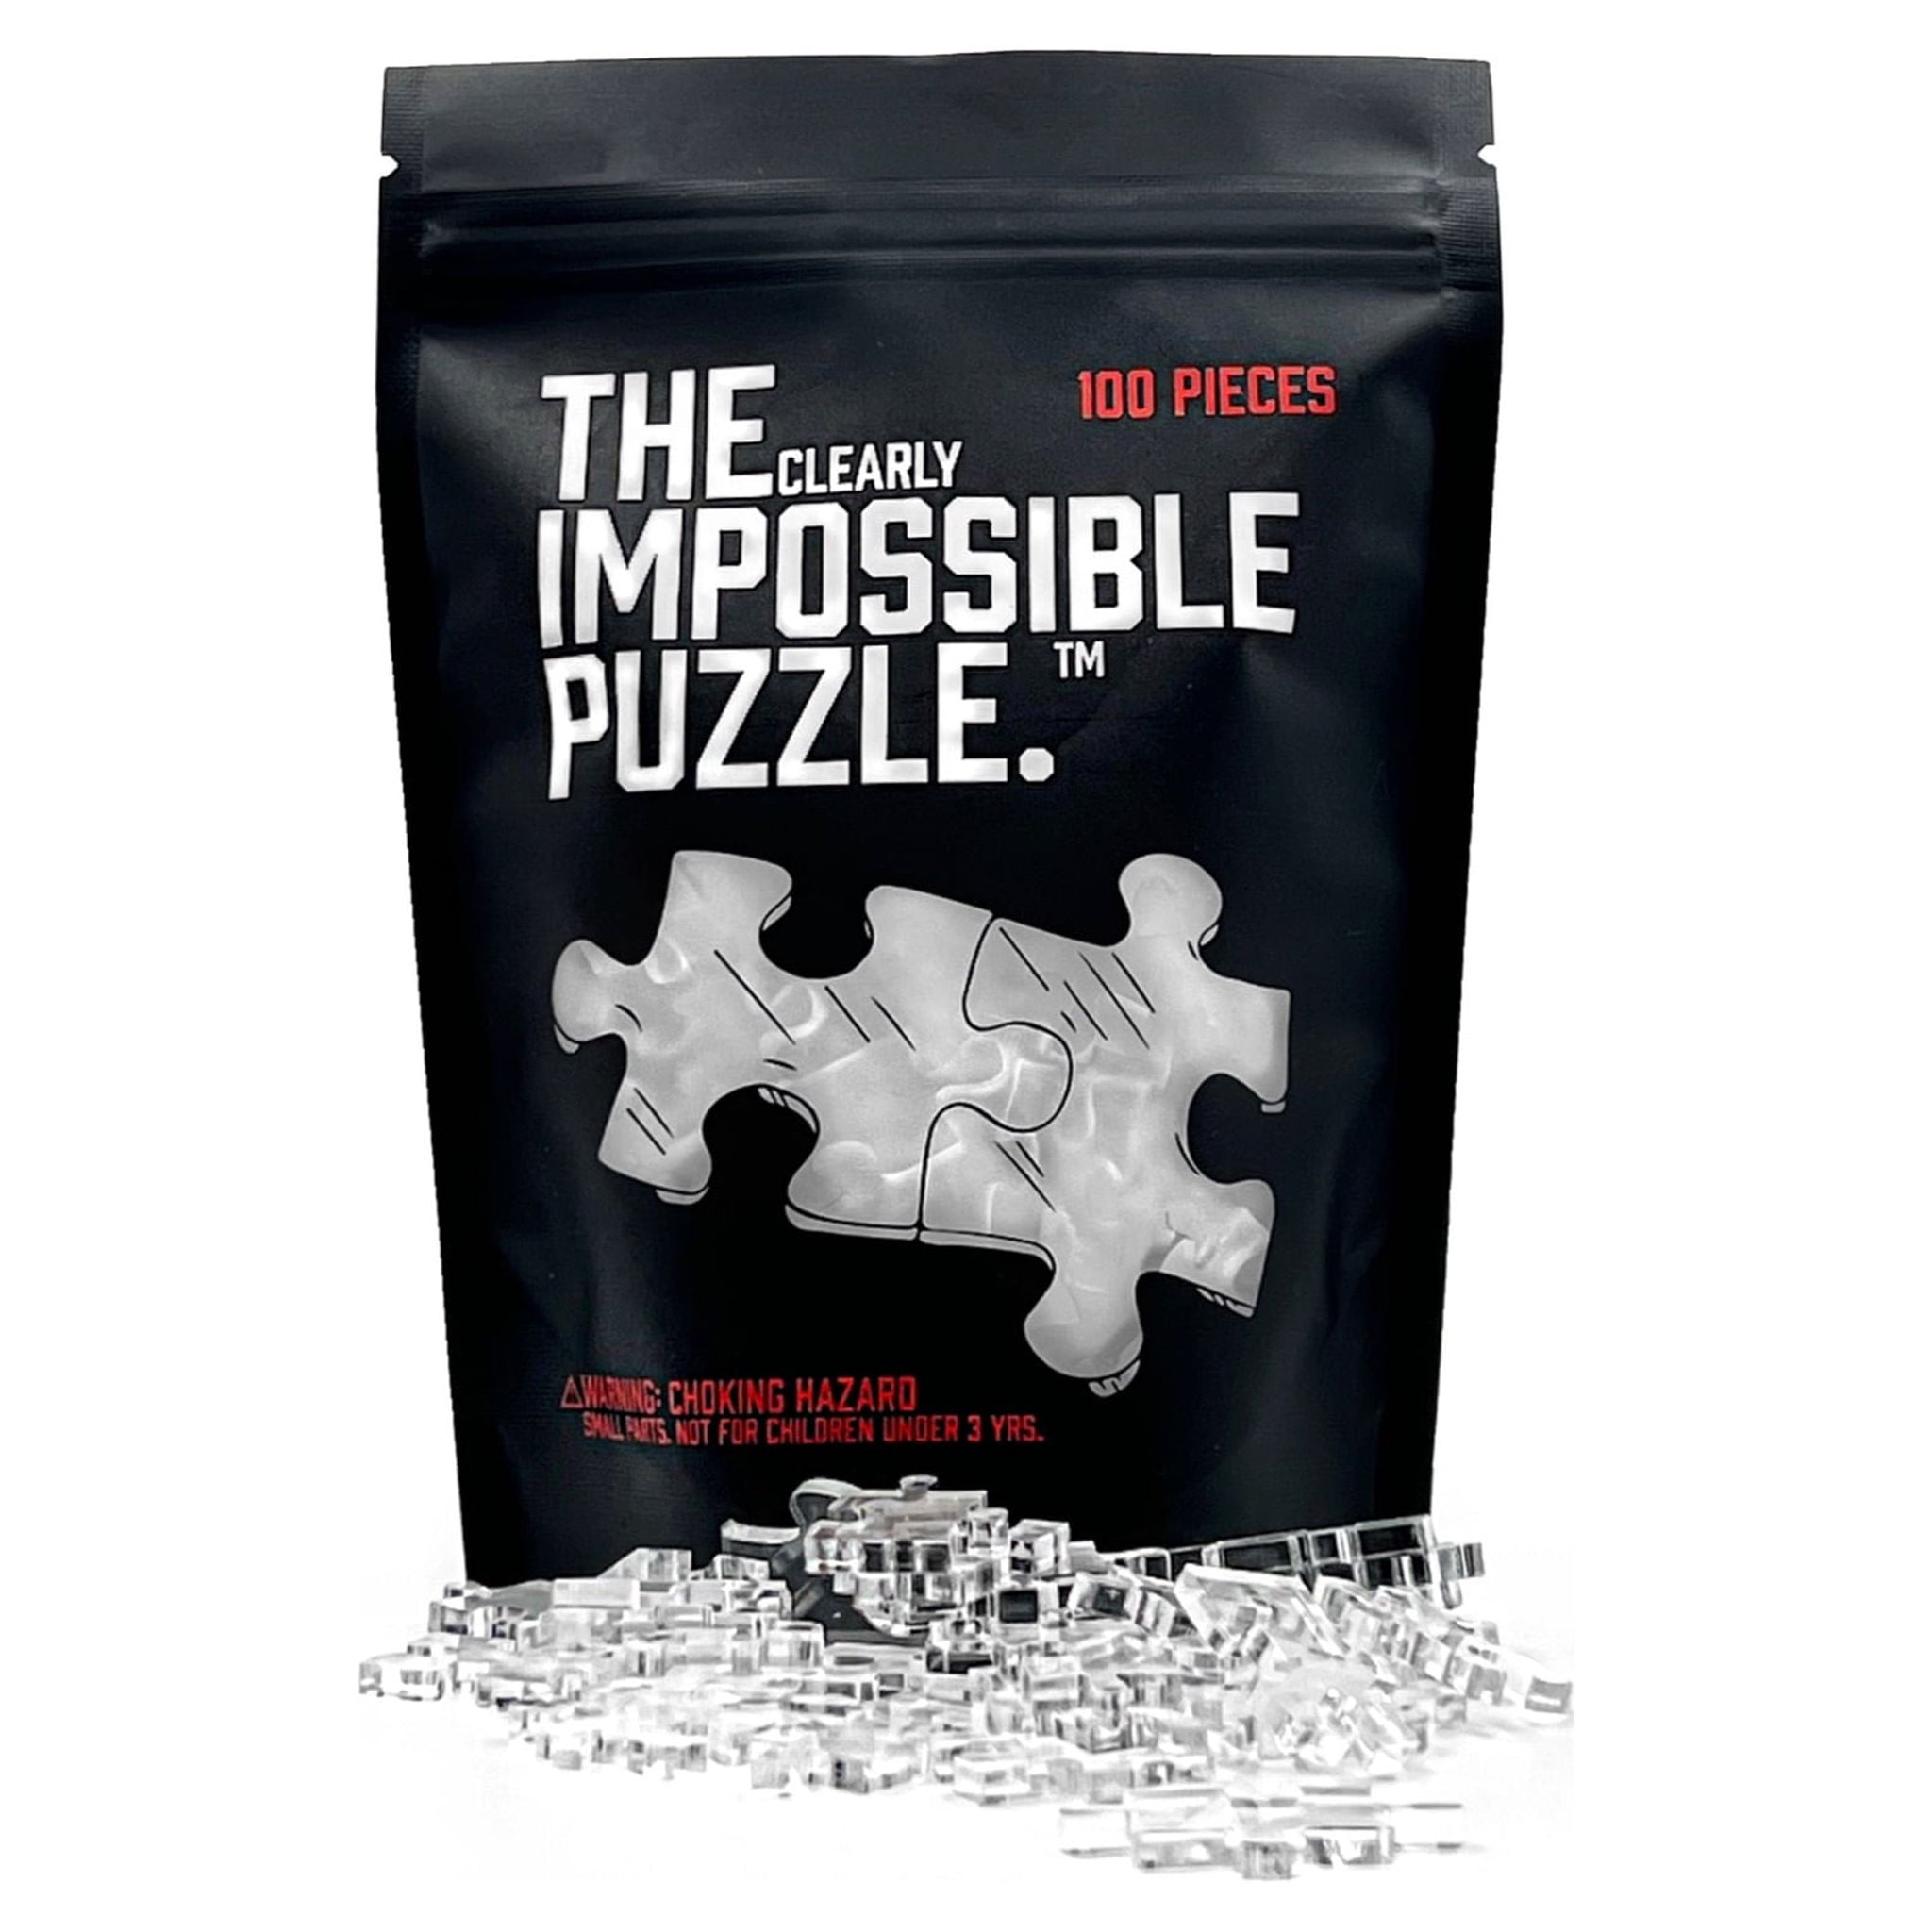 Clearly Impossible Puzzle, 100 pcs. : r/Jigsawpuzzles